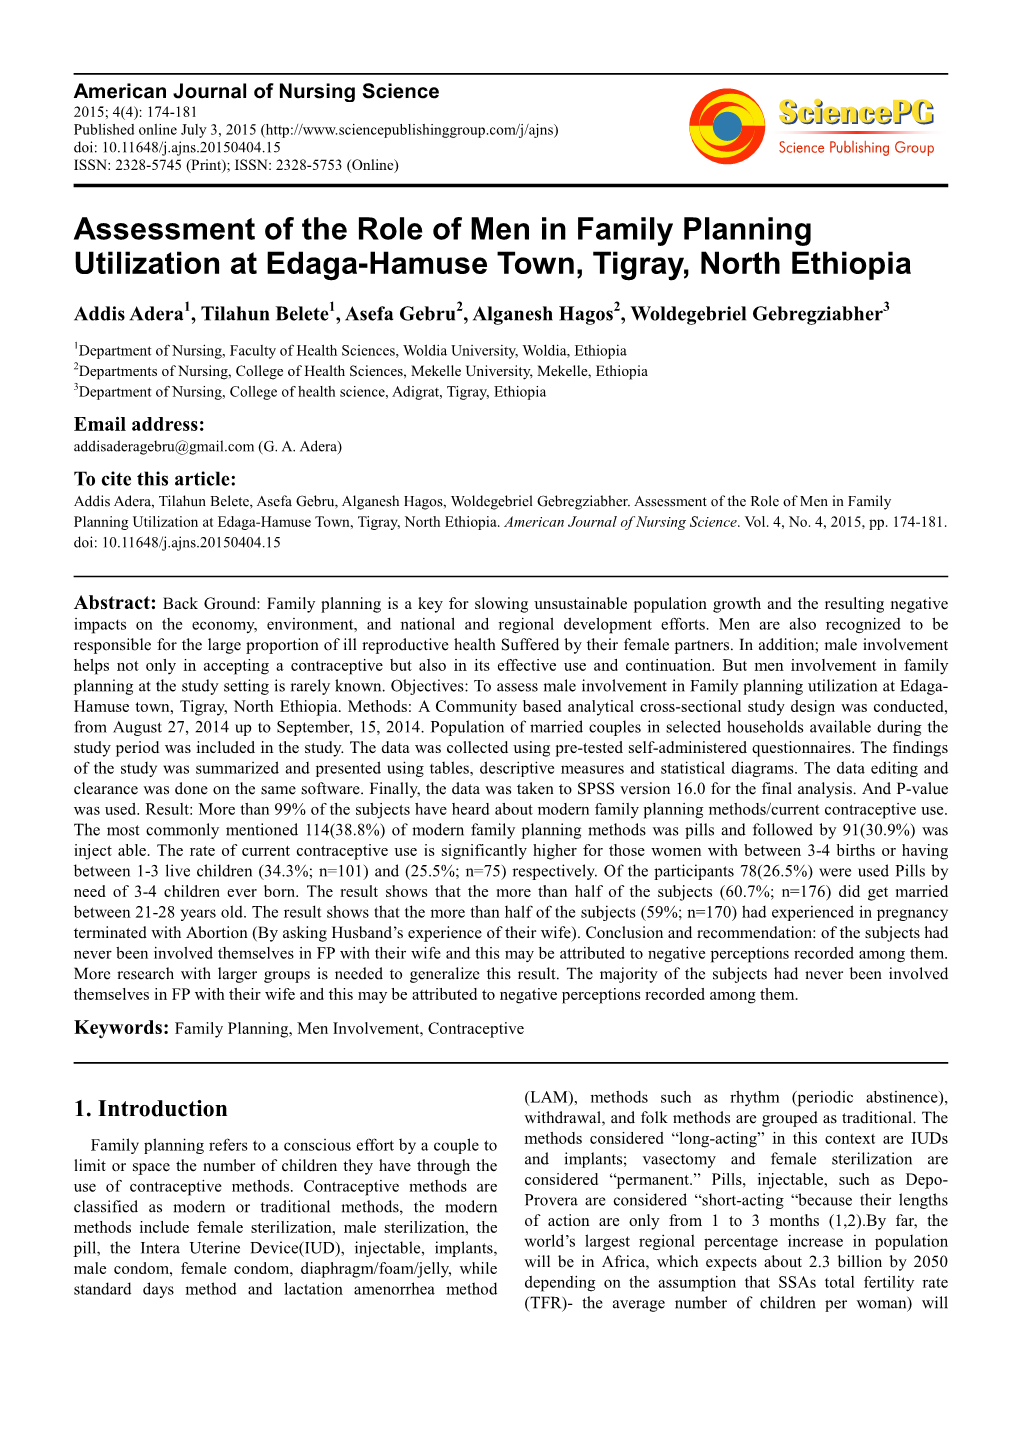 Assessment of the Role of Men in Family Planning Utilization at Edaga-Hamuse Town, Tigray, North Ethiopia